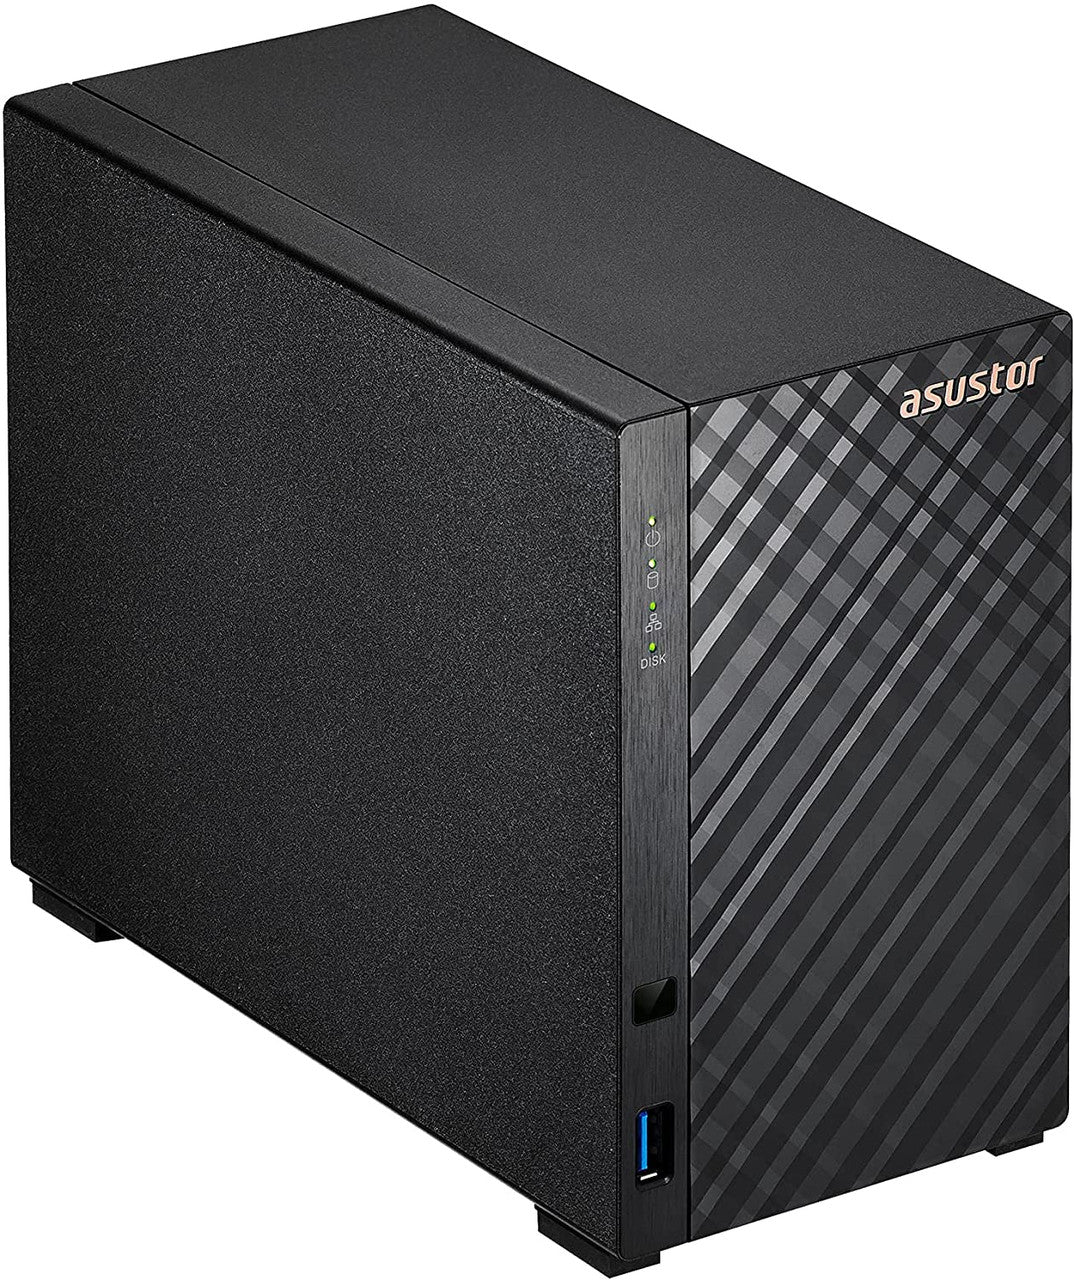 Asustor AS1102T 2-Bay Drivestor 2 NAS with 1GB RAM and 12TB (2x6TB) Western Digital RED PRO Drives